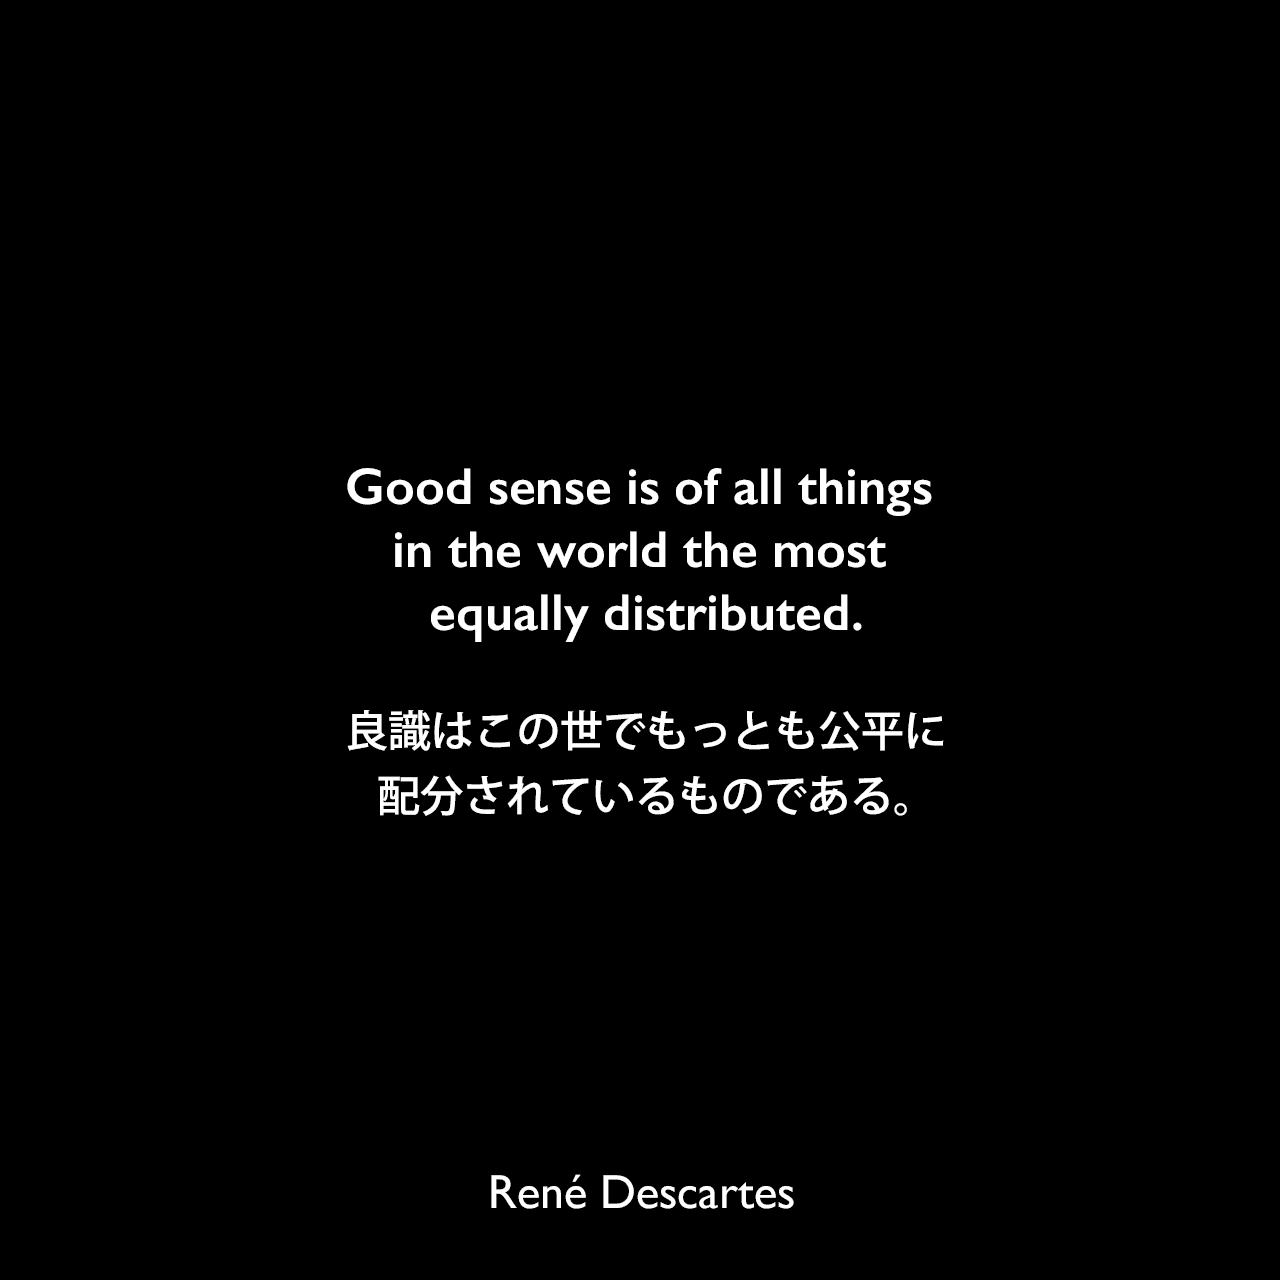 Good sense is of all things in the world the most equally distributed.良識はこの世でもっとも公平に配分されているものである。René Descartes